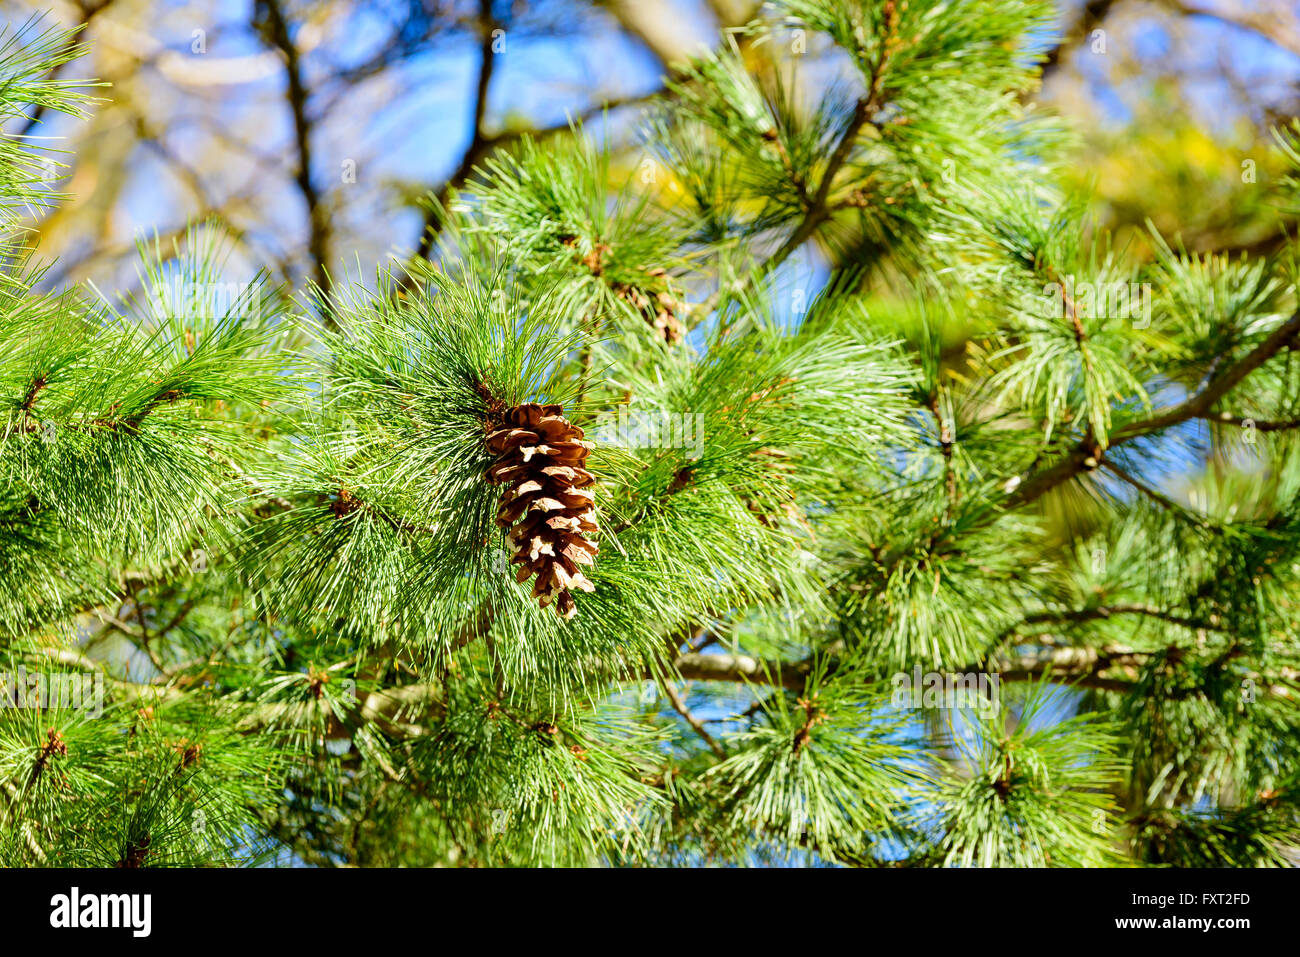 Pinus peuce, the Macedonian pine, here seen close up with one of its matured cones. Stock Photo